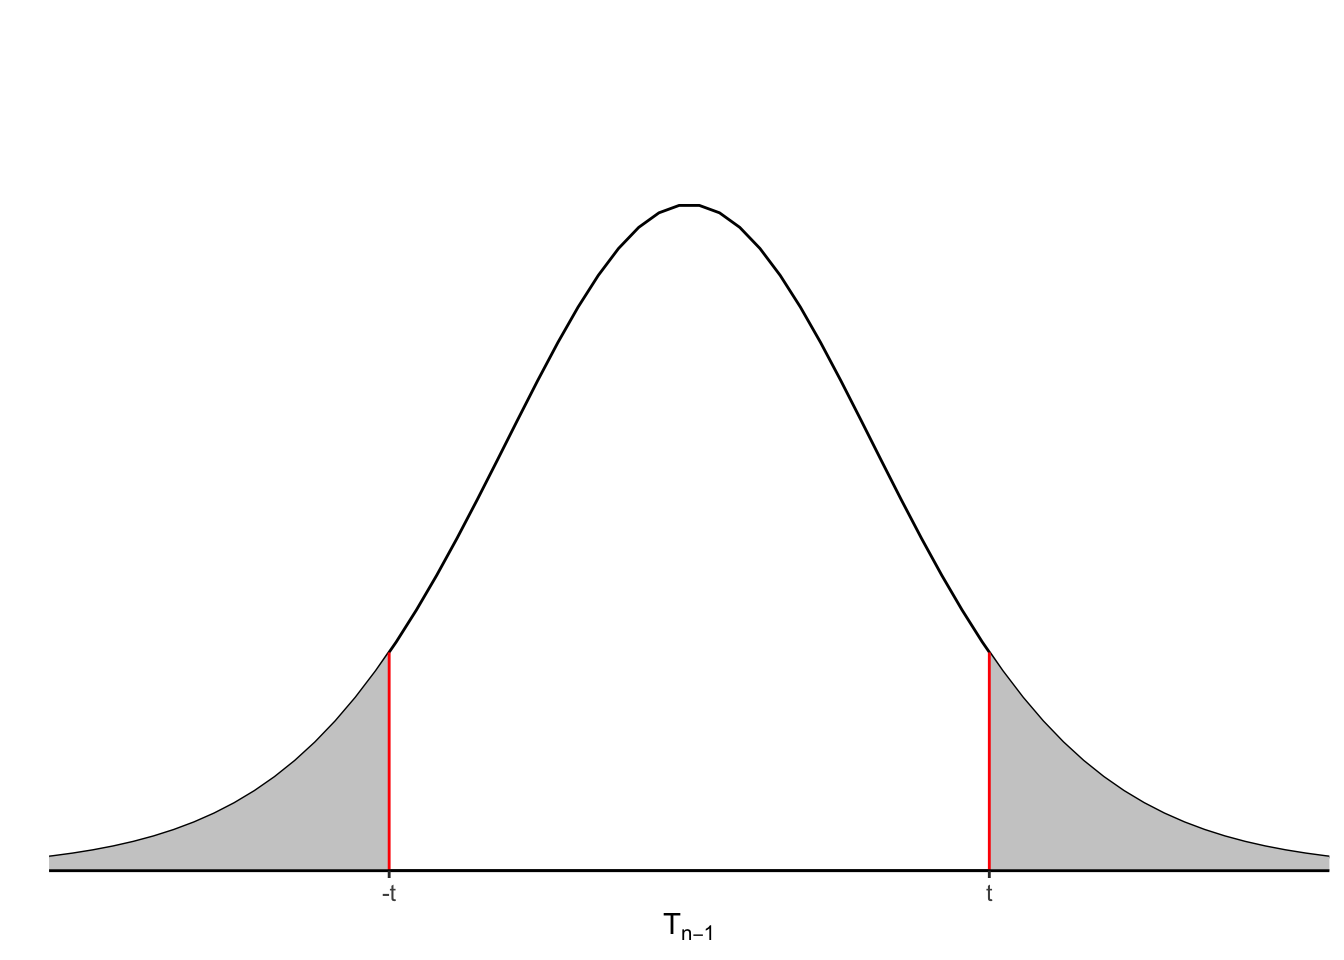 Density curve for T-distribution. Shaded areas on left and right represent $P(T > |t|)$.